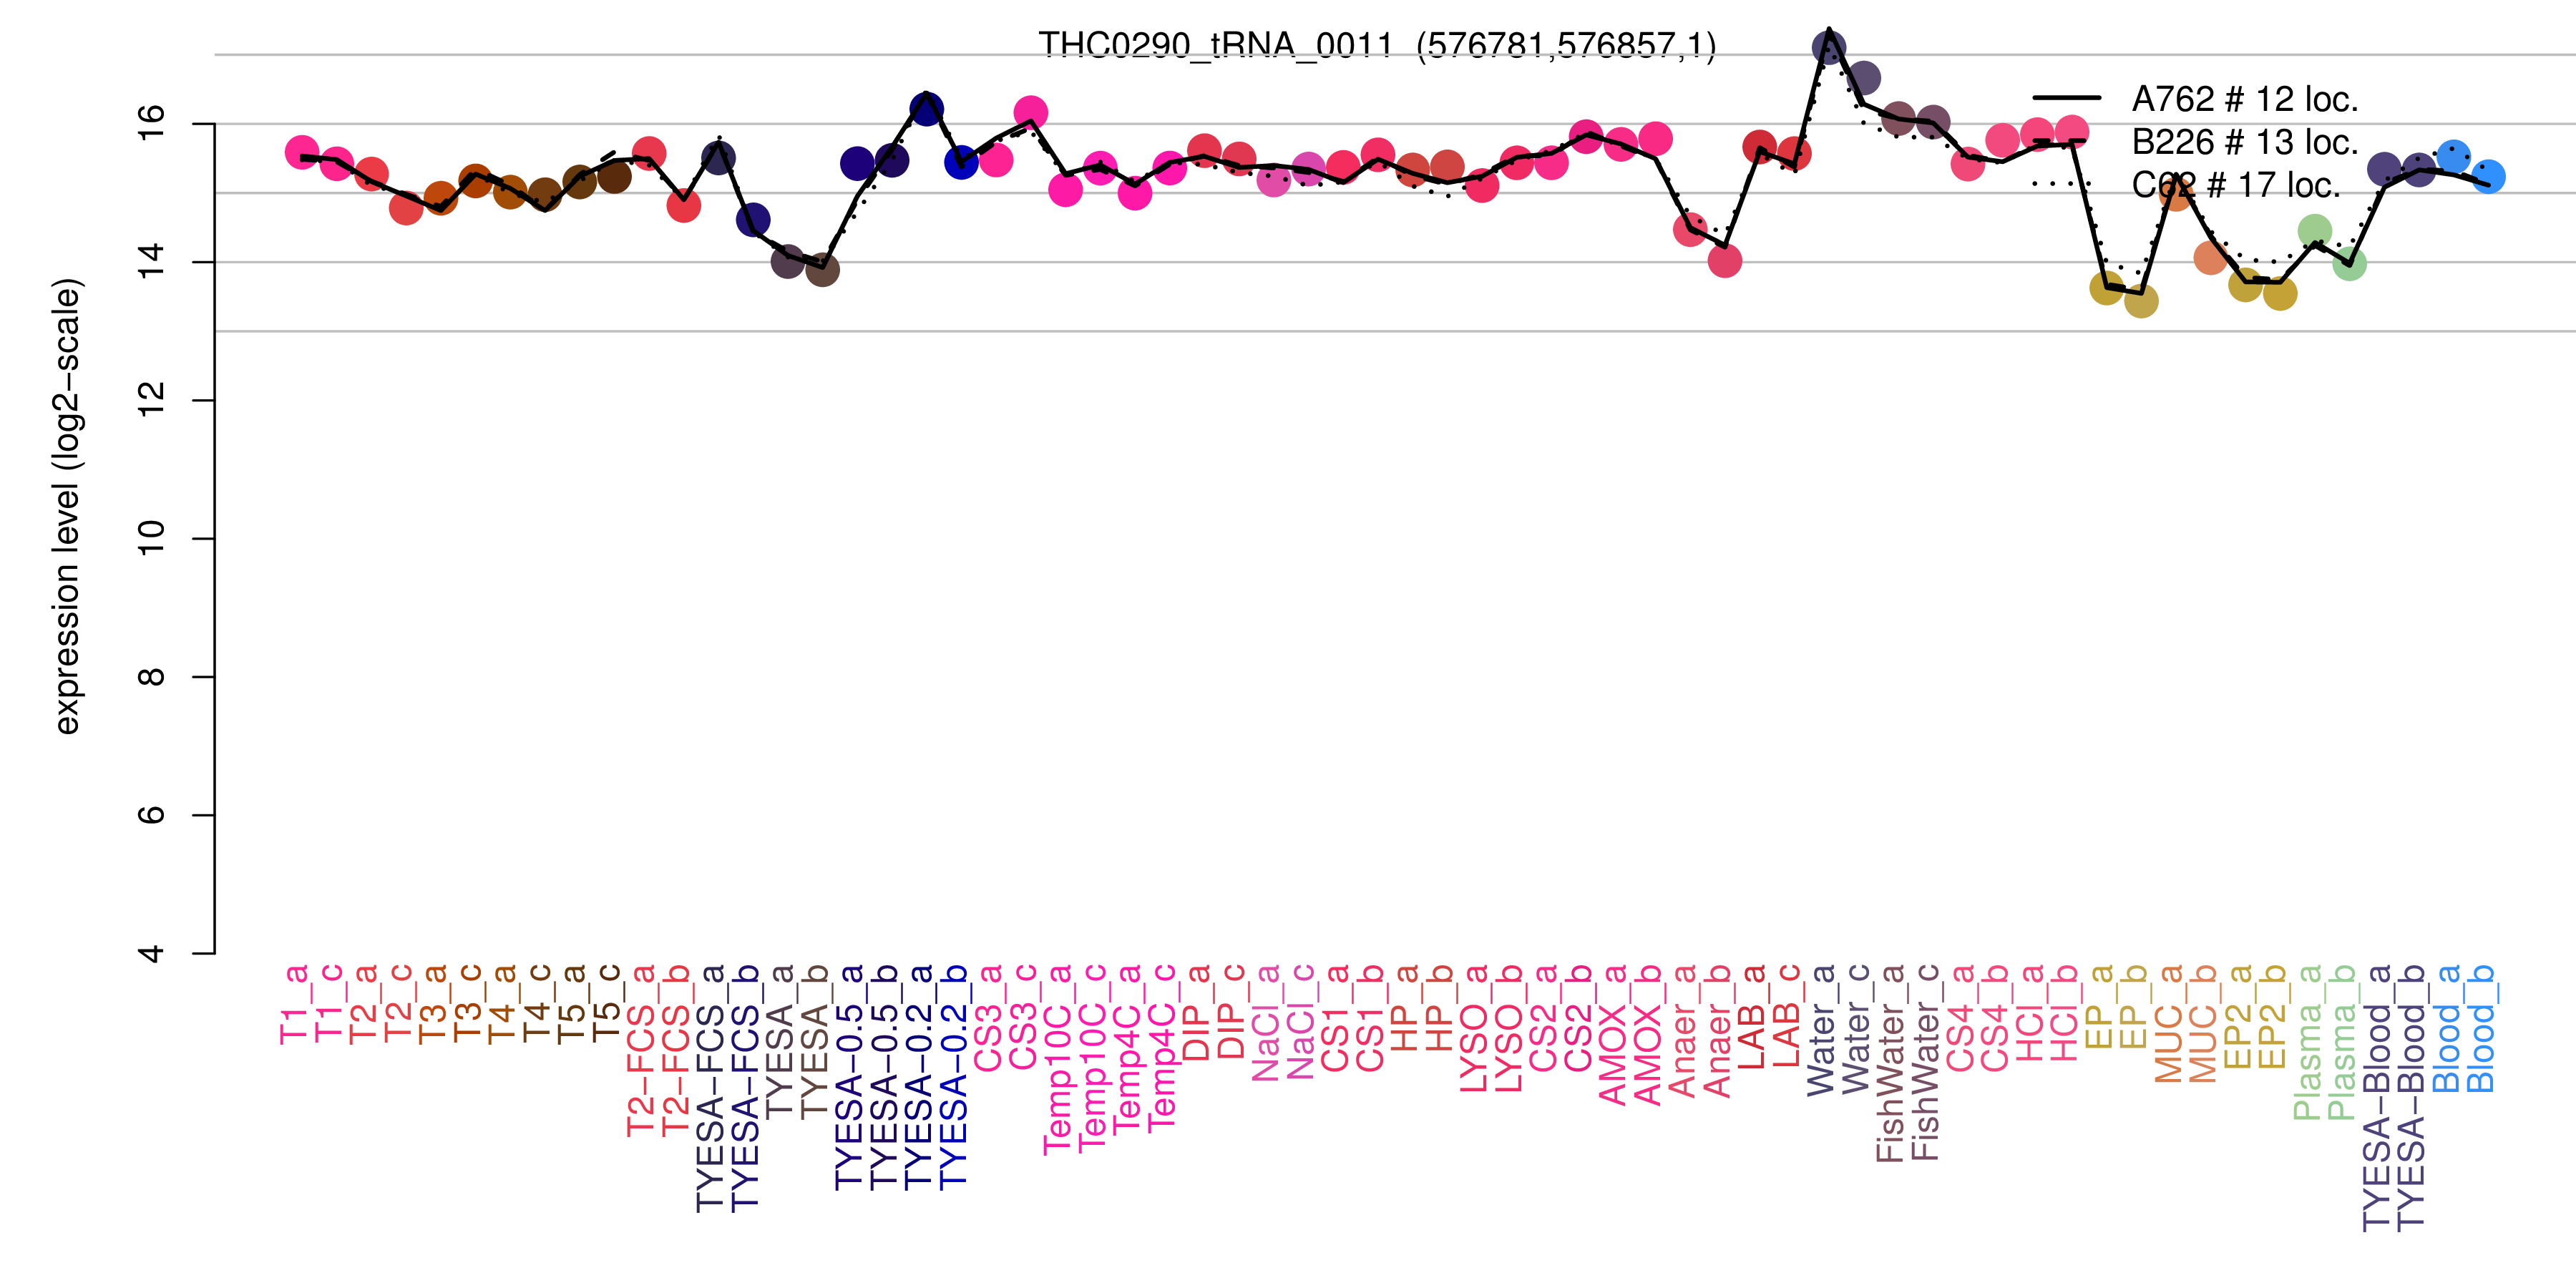 THC0290_tRNA_0011 expression levels among conditions